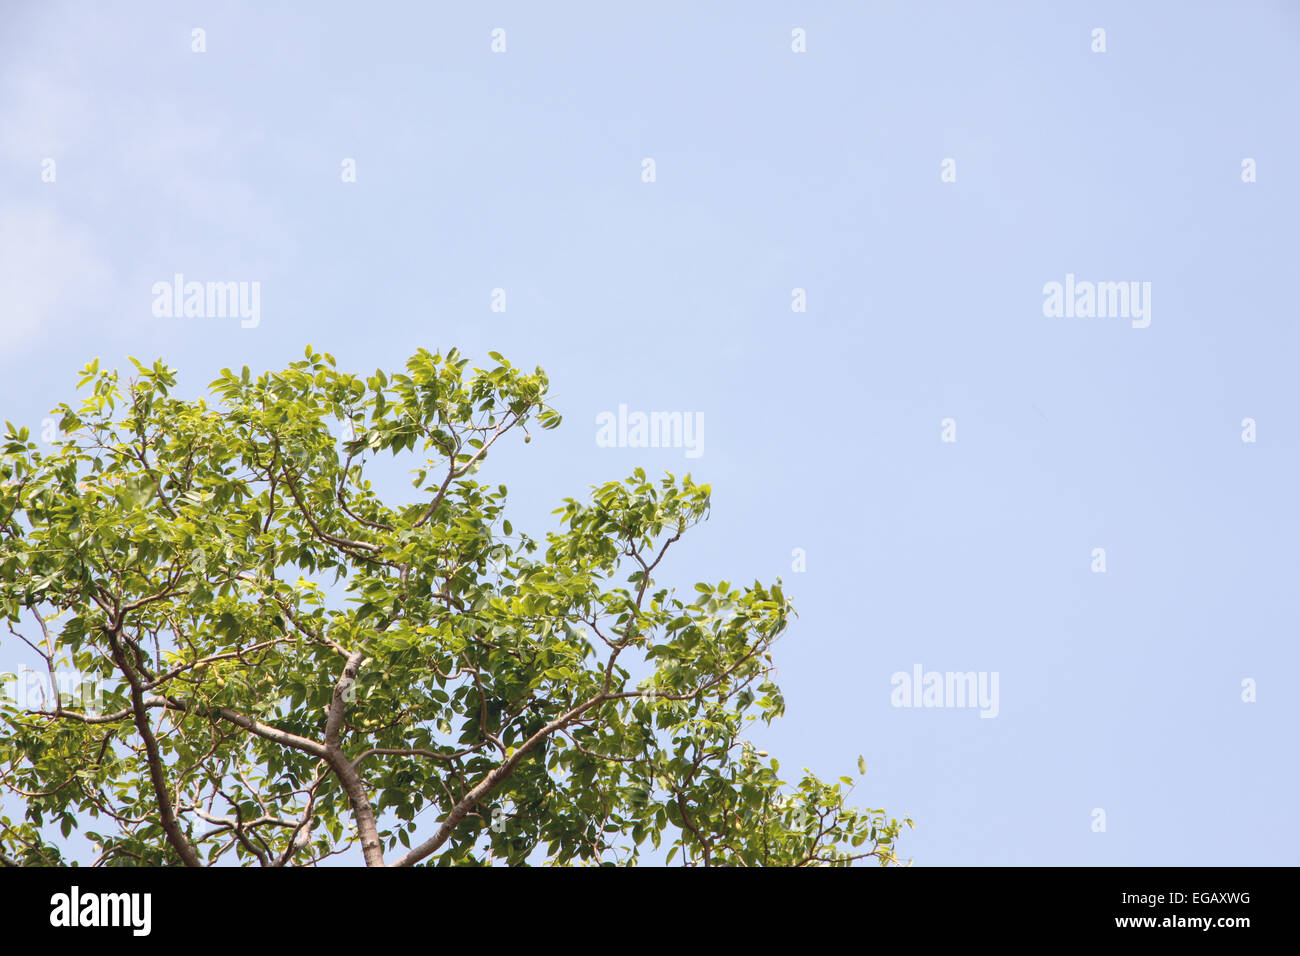 The Green trees on blue sky background. Stock Photo